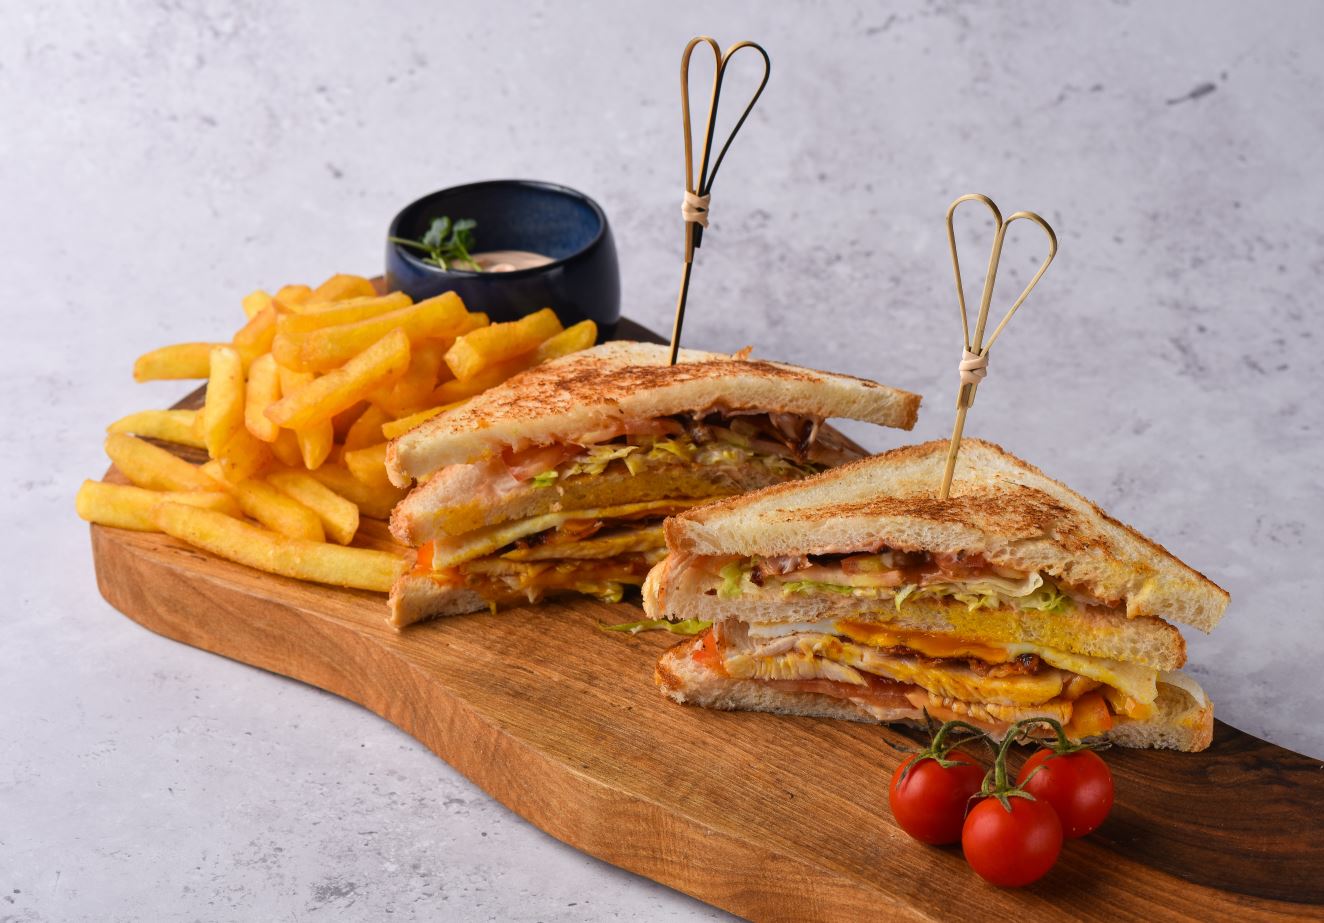 Club sandwich with chicken, bacon and potatoes